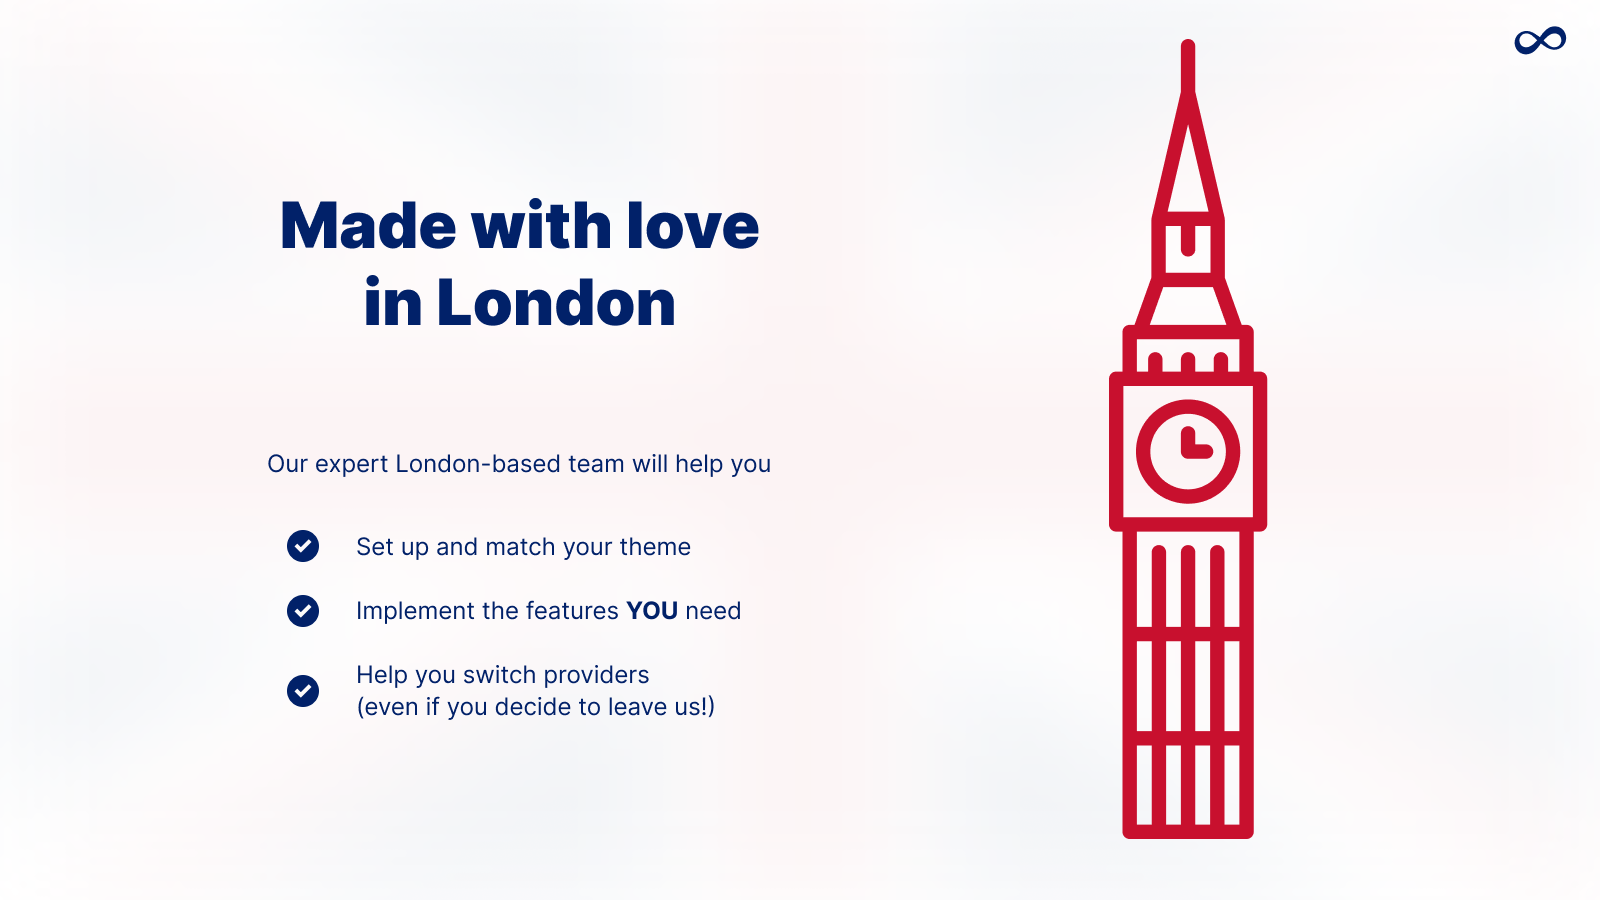 Made with love in London